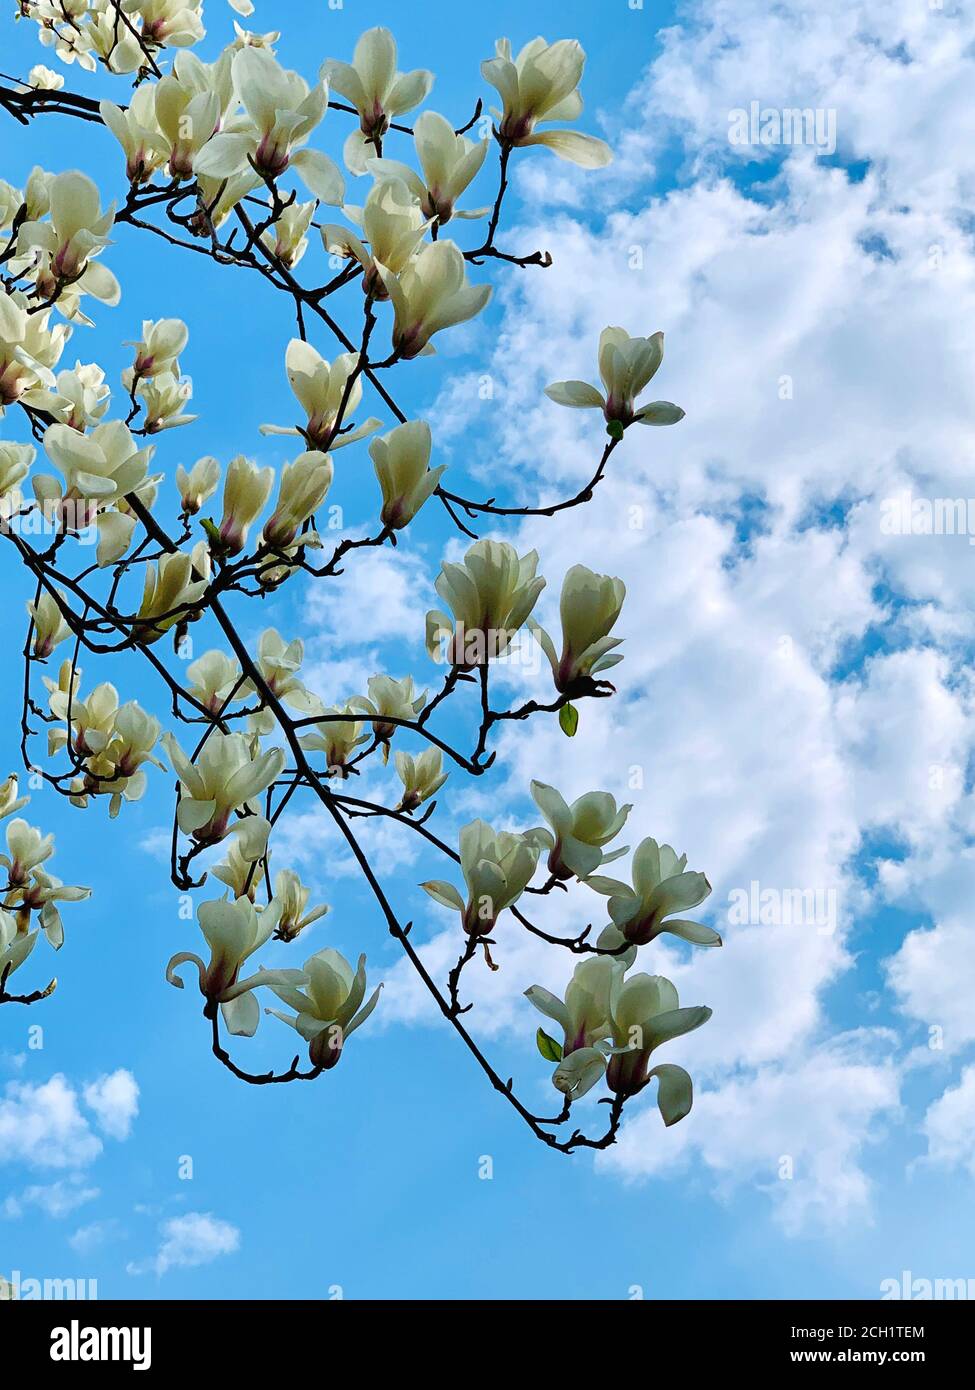 Beautiful magnolia flowers against blue clouds sky. Spring white flowers in botanical garden. Large fragrant flower. Magnolia grandiflora blooms scene Stock Photo